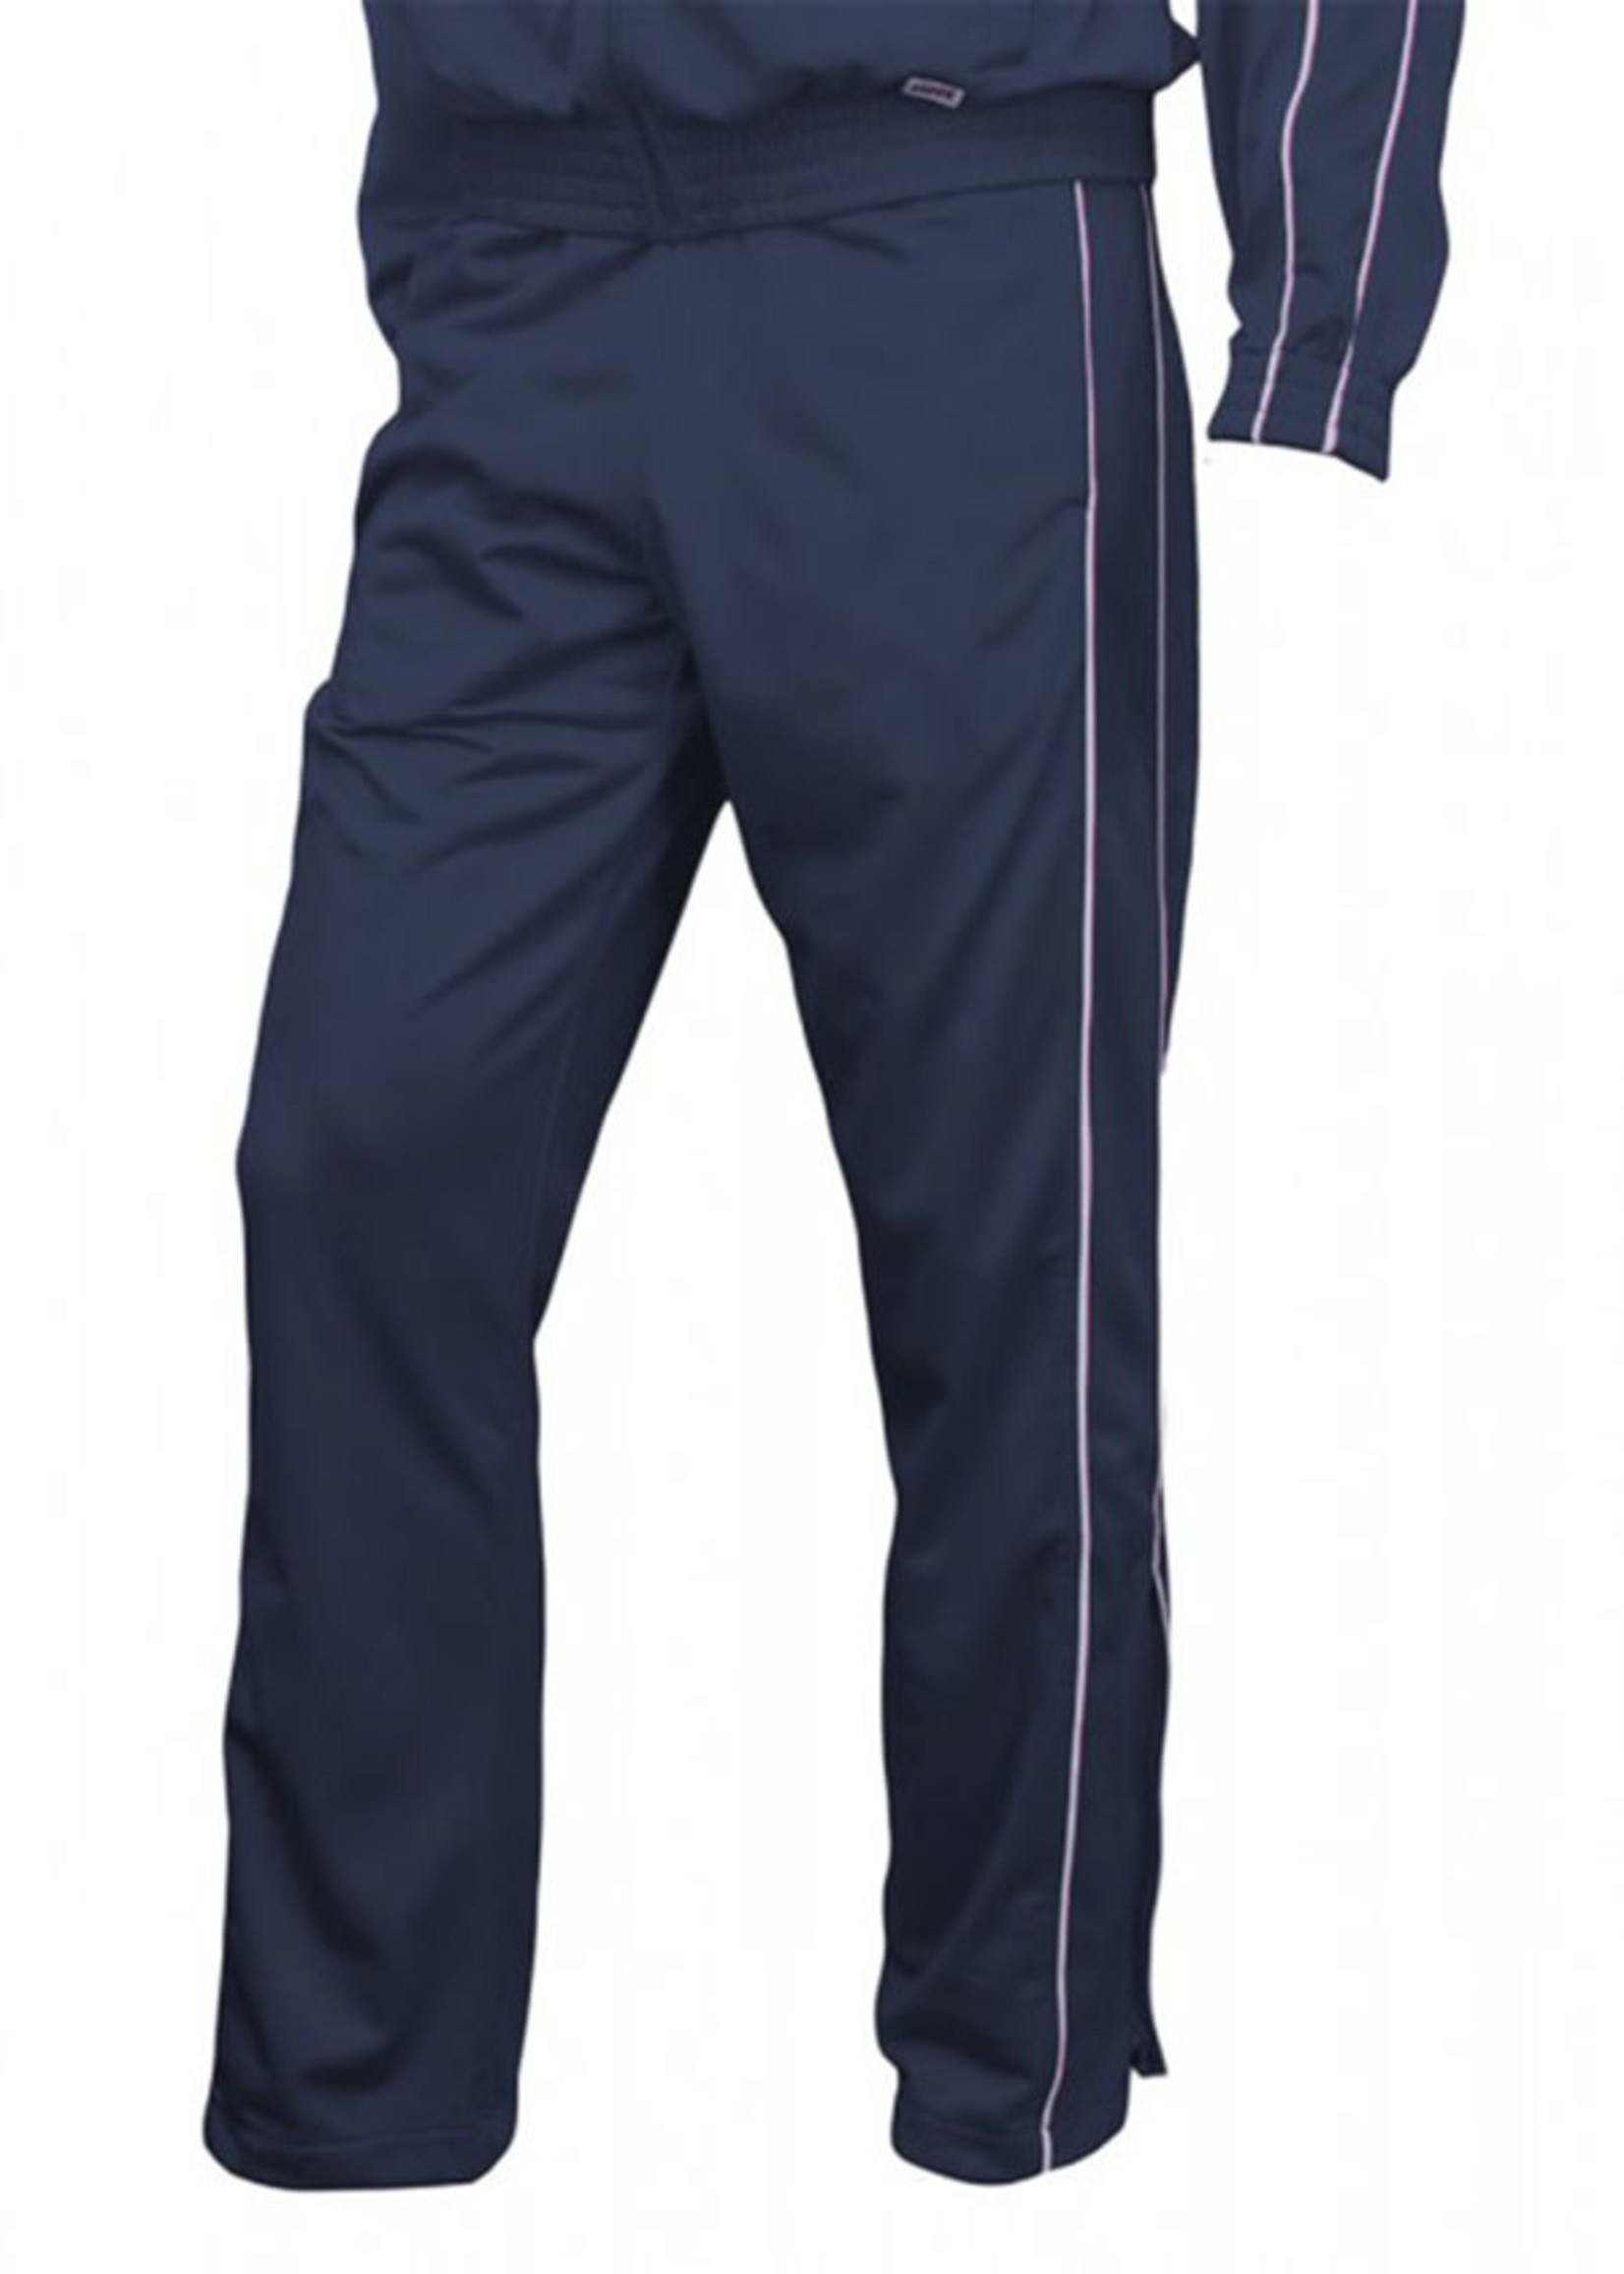 Tricot Navy Warm Up Pants